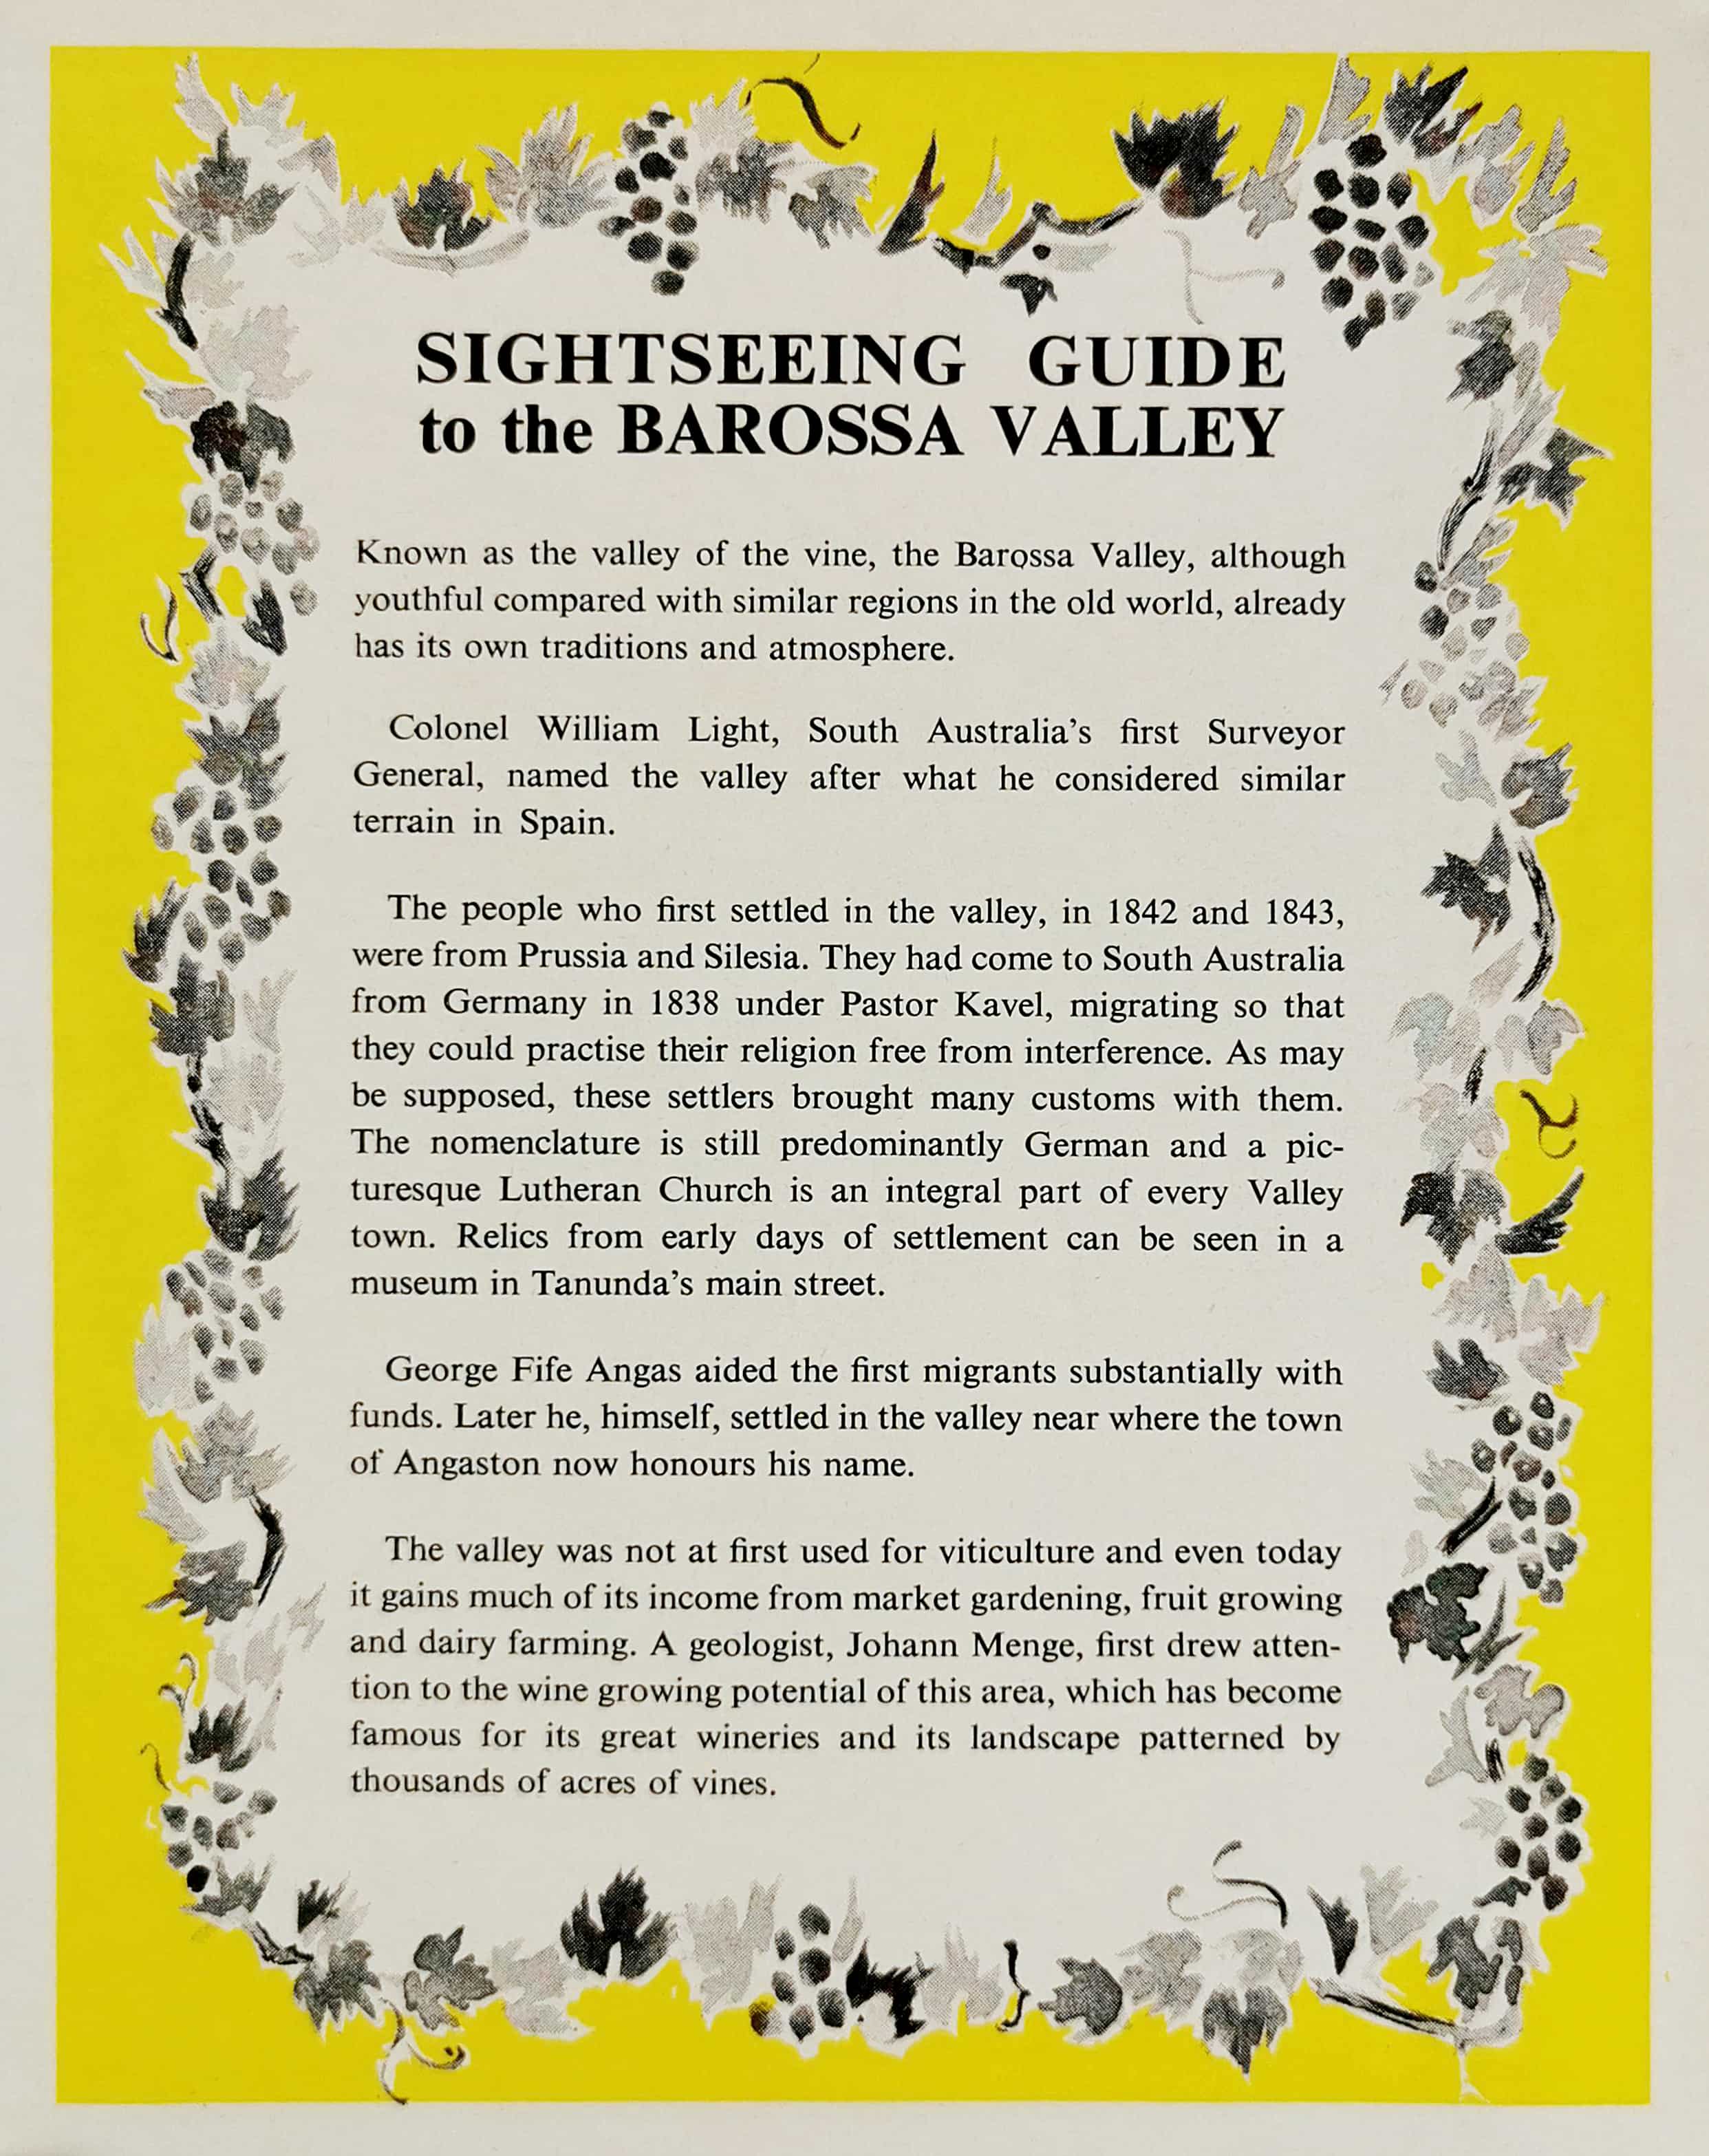 Sightseeing Guide to the Barossa Valley - Vintage Ephemera from 1967